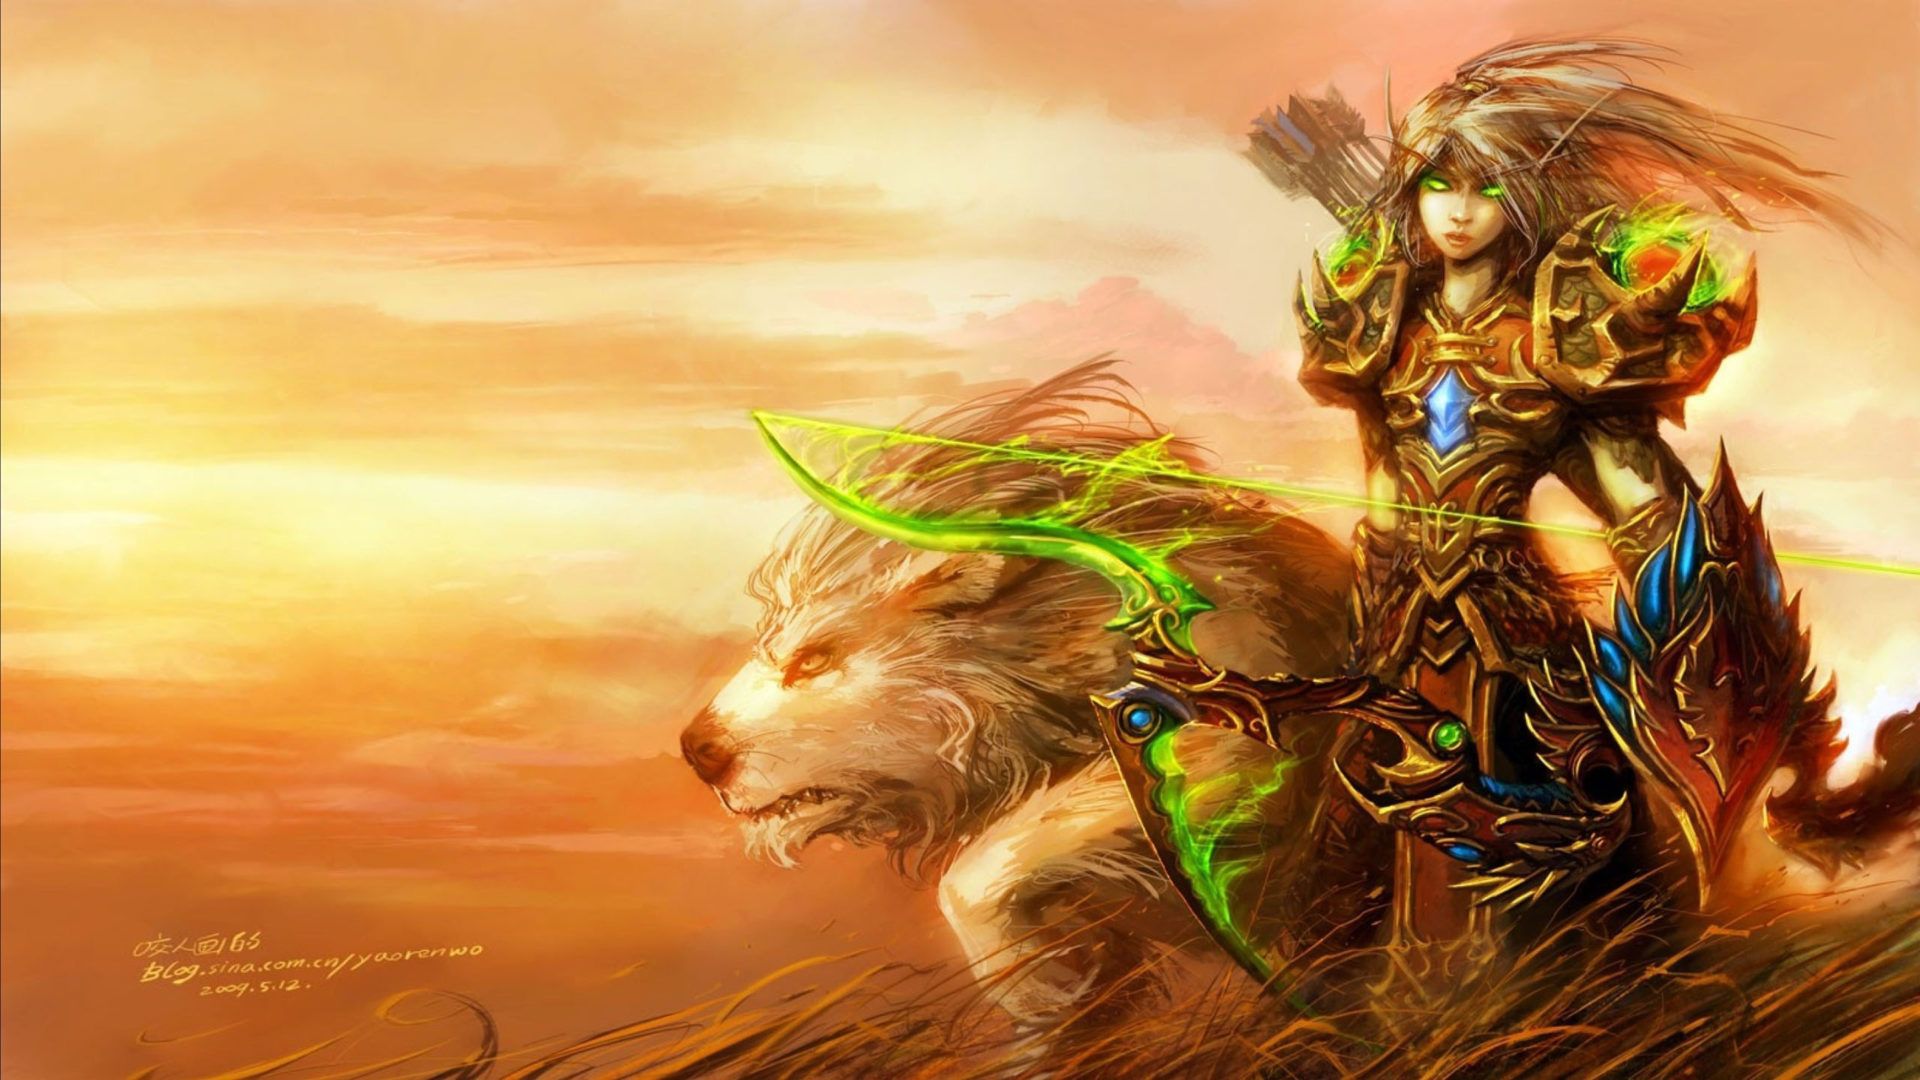 World Of Warcraft Hunter Playable Class Roles Damage Features Ranged Damage Pets Melee Damage Solo Play HD Wallpaper 2560x1440, Wallpaper13.com